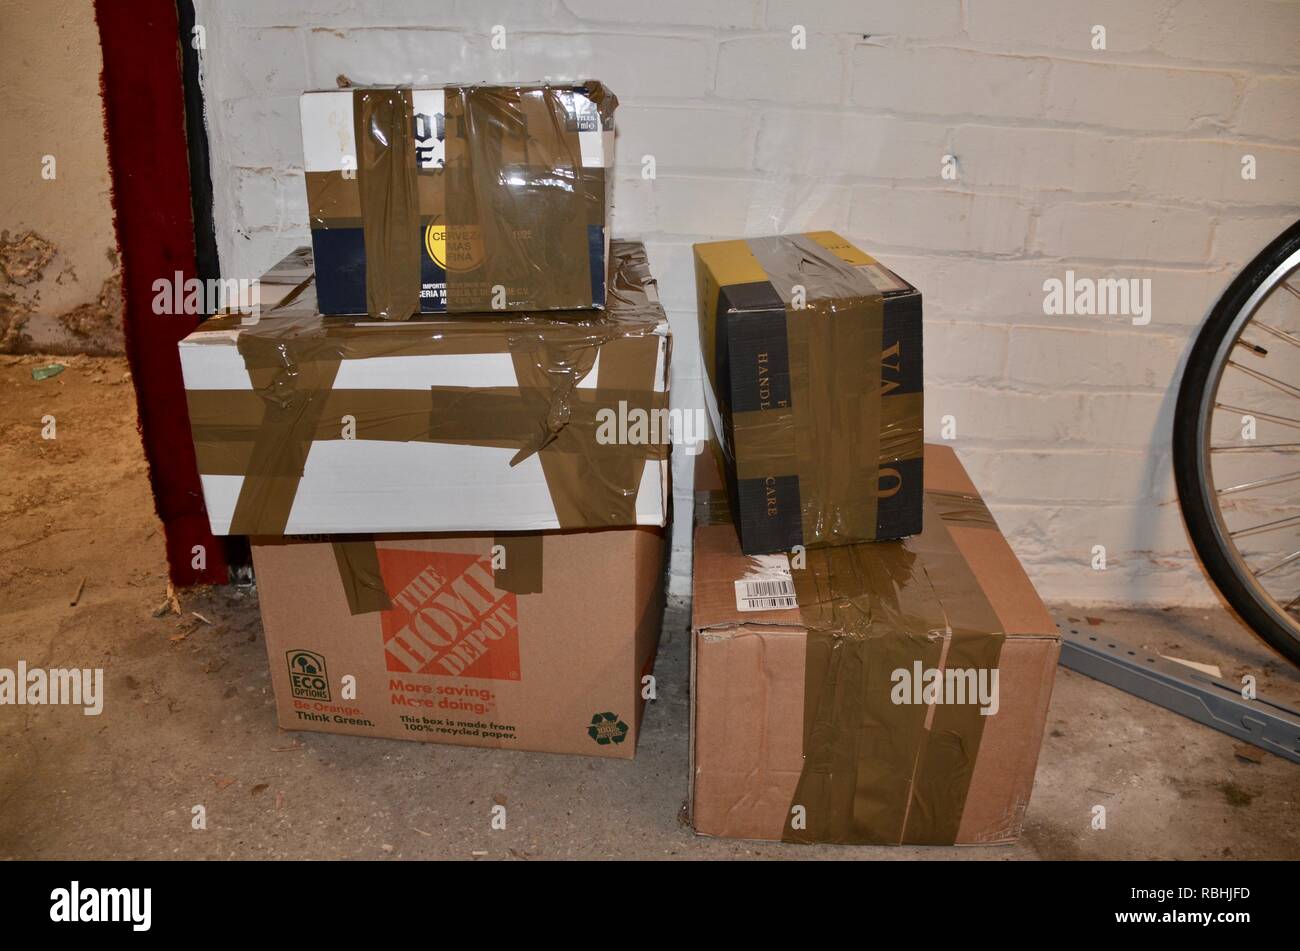 no deal brexit emergency supply boxes in london cellar january 2019 Stock Photo